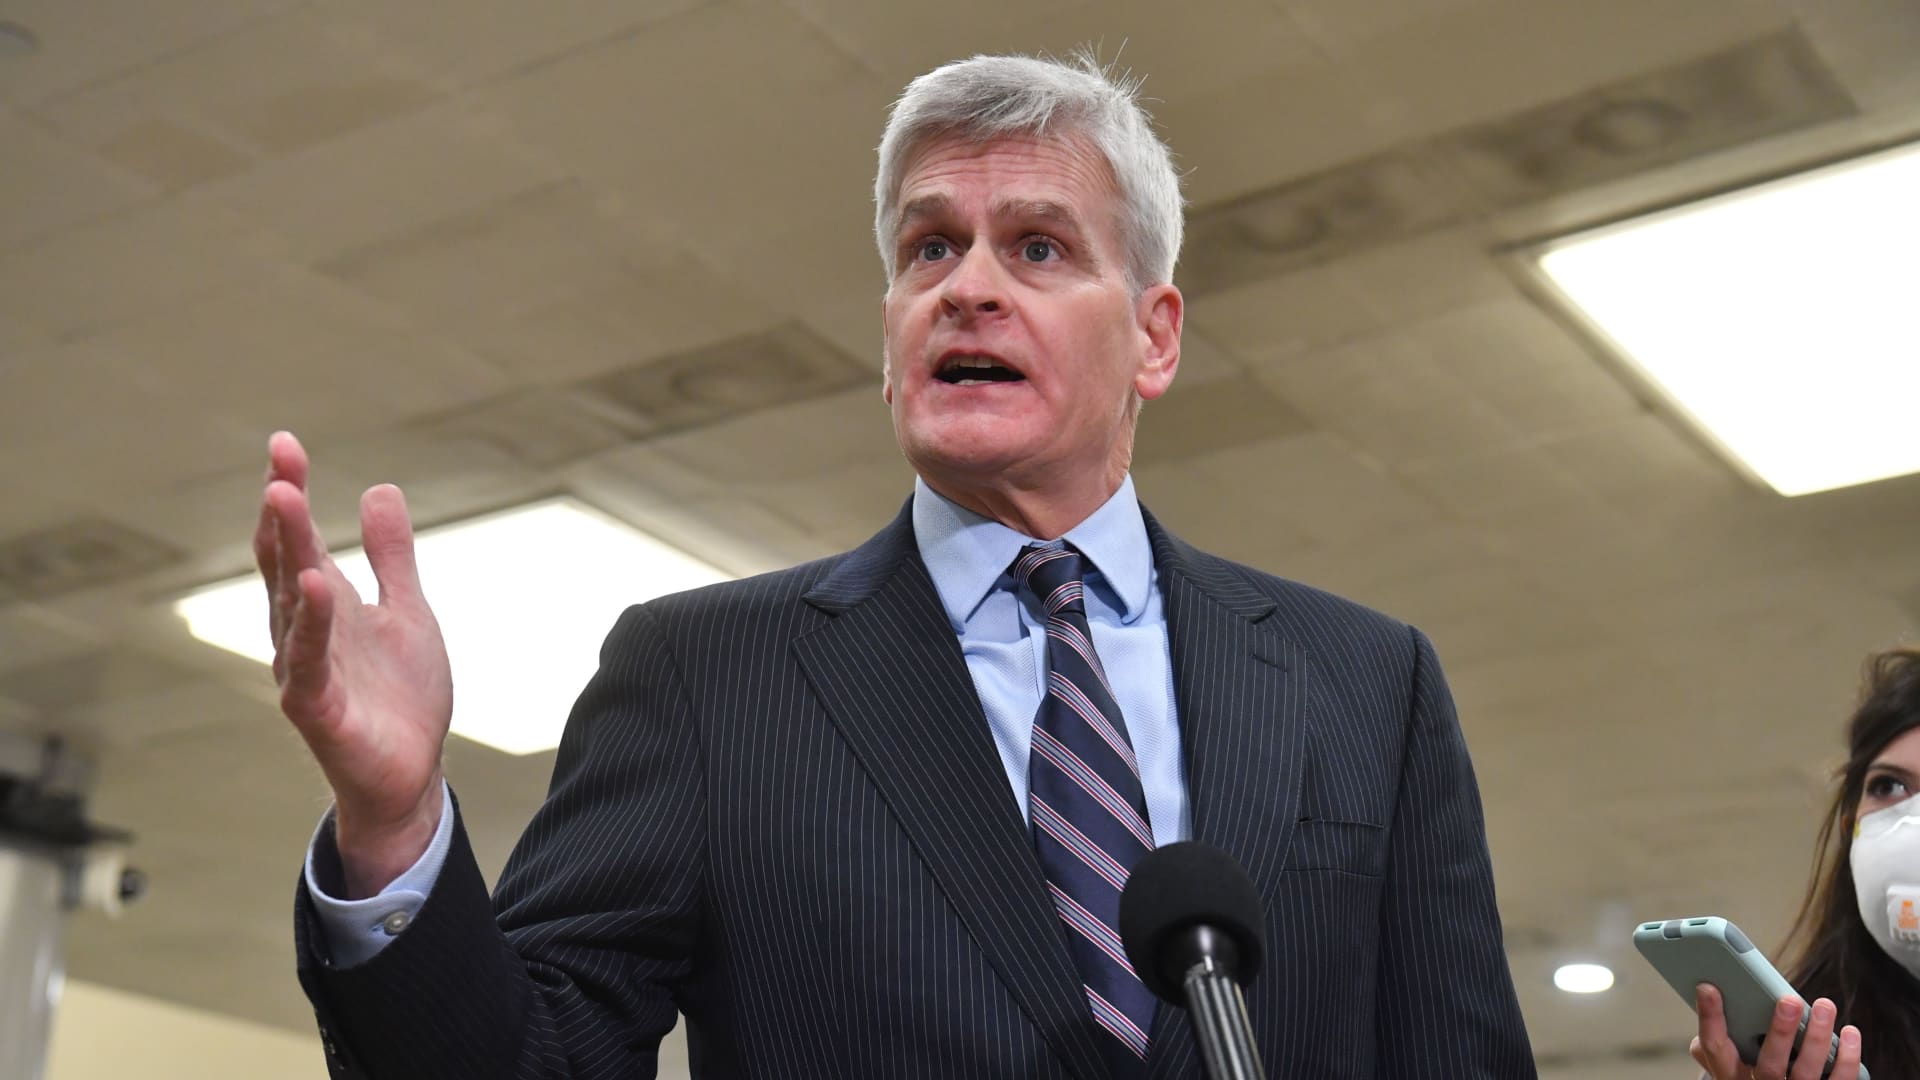 Republican Sen. Bill Cassidy of Louisiana speaks to the press on Capitol Hill on Feb. 10, 2021.